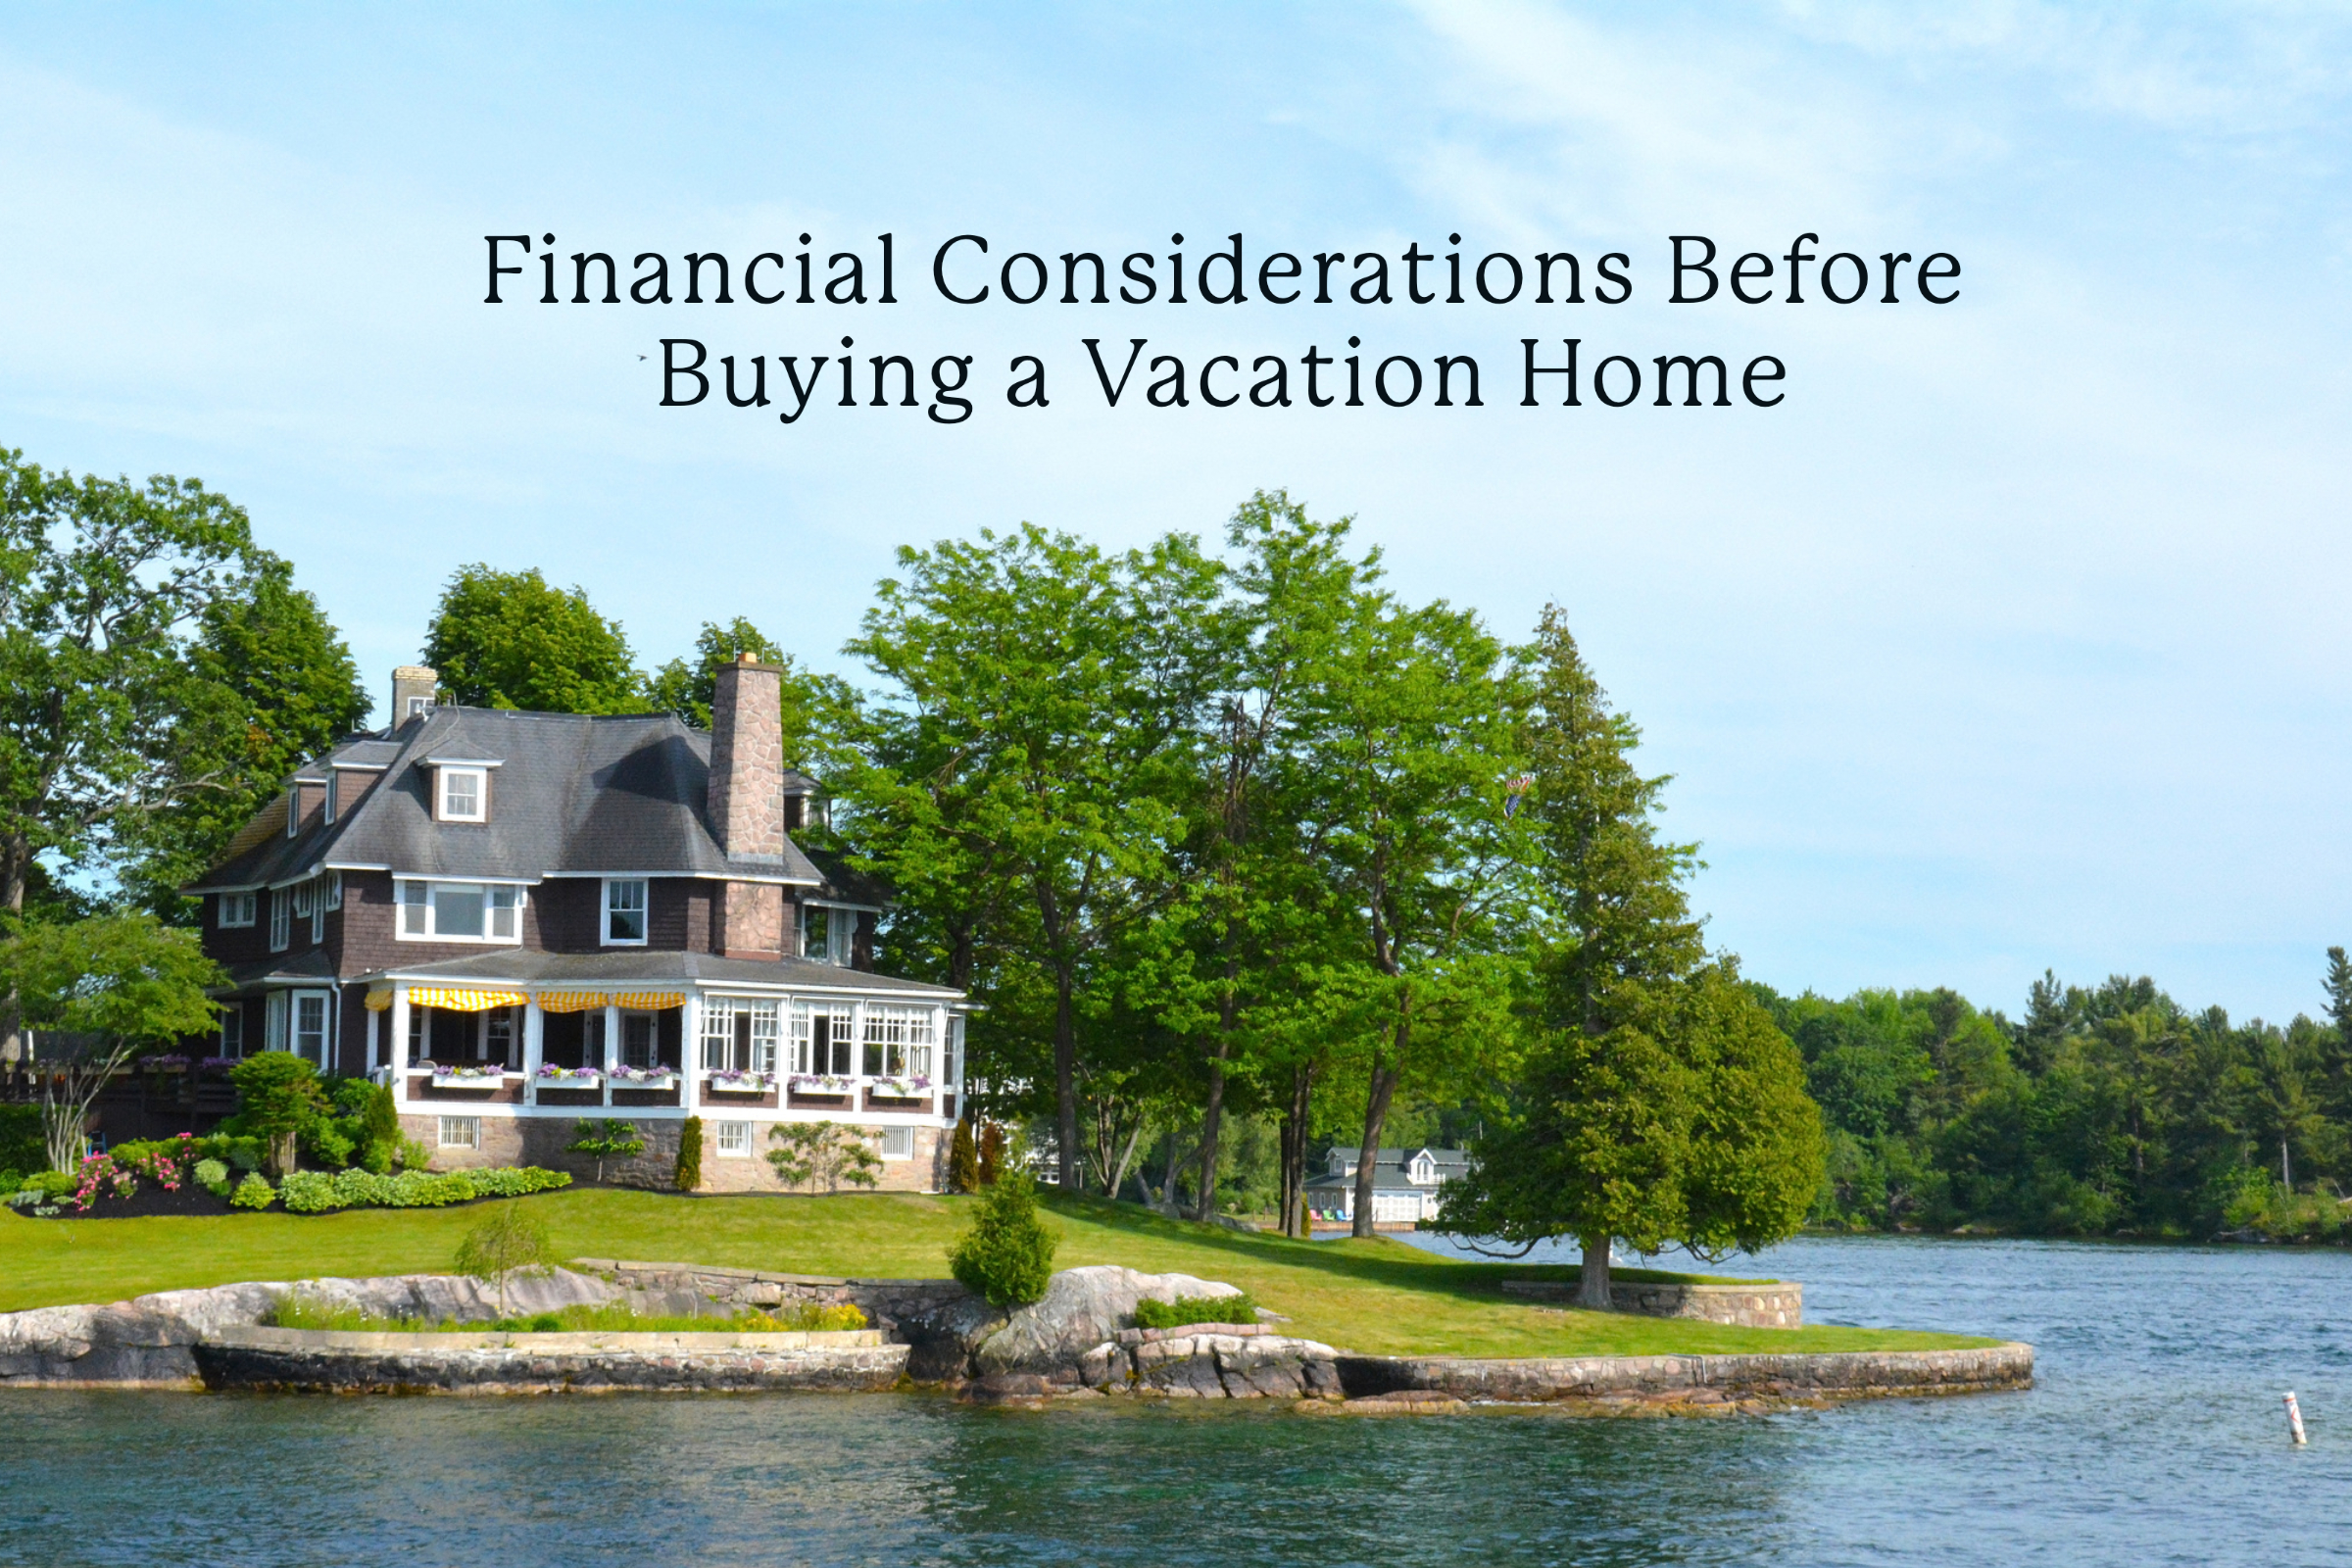 Financial Considerations Before Buying a Vacation Home